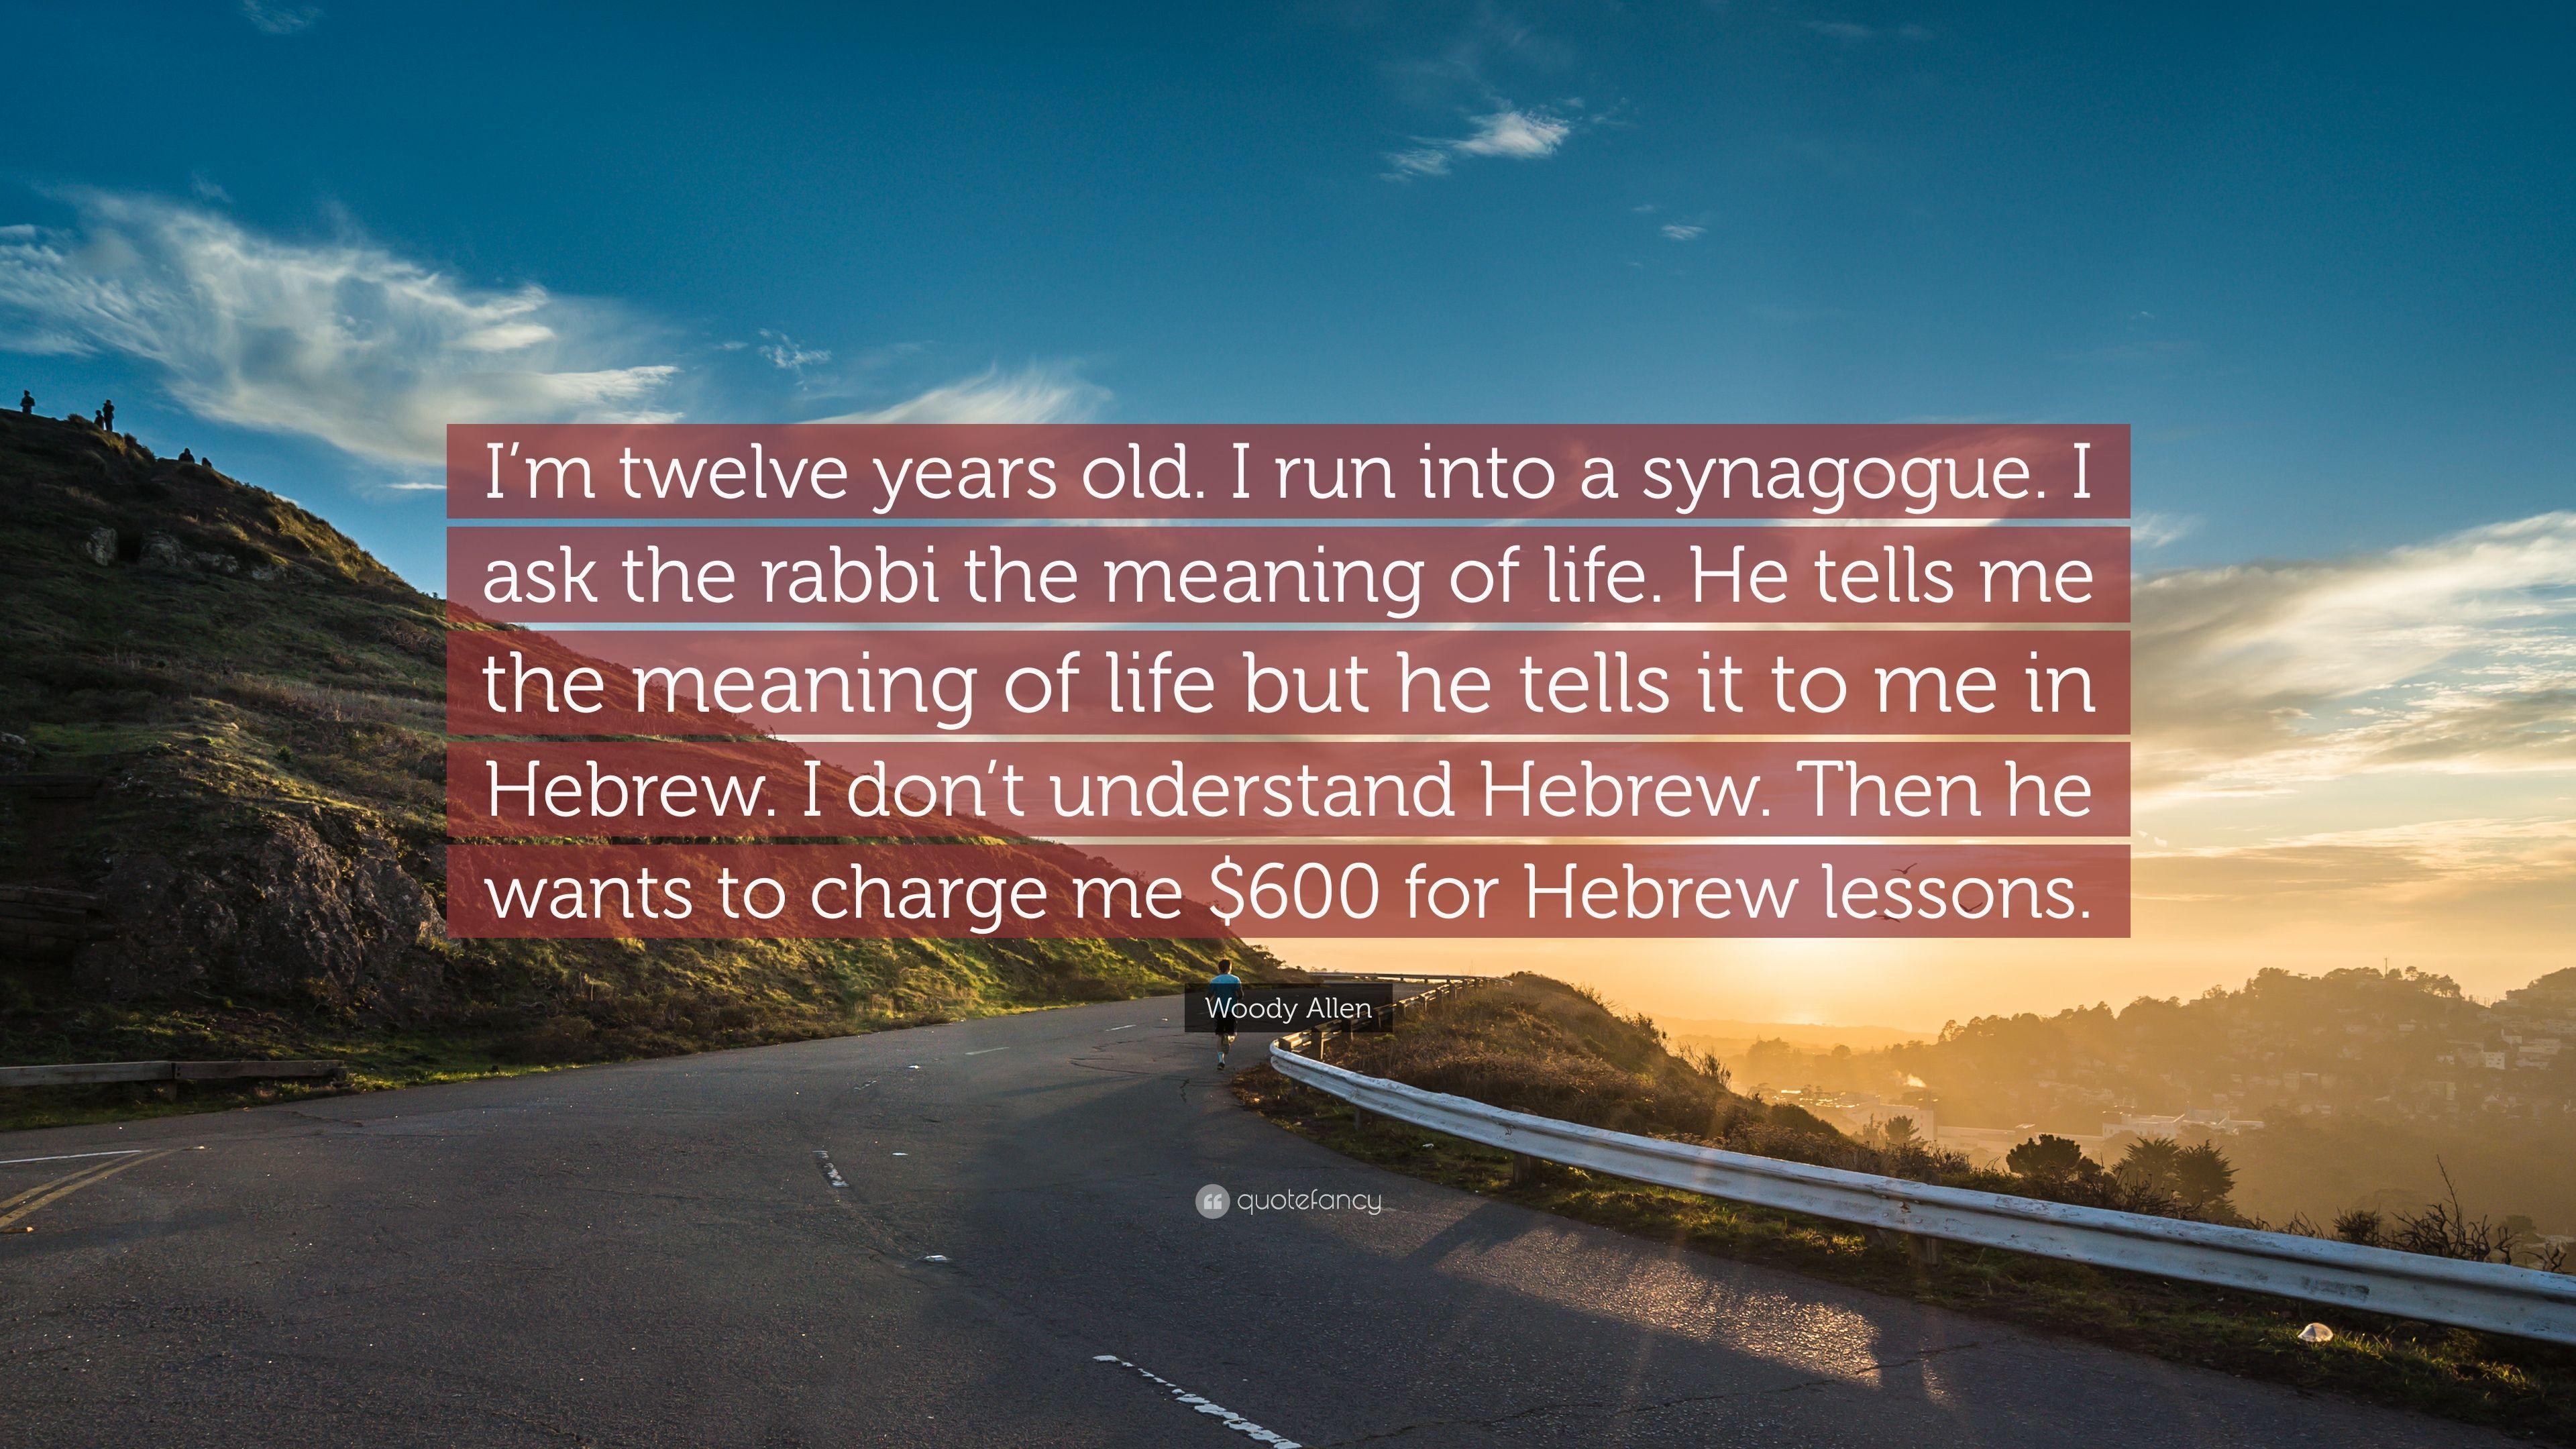 Woody Allen Quote: “I'm twelve years old. I run into a synagogue